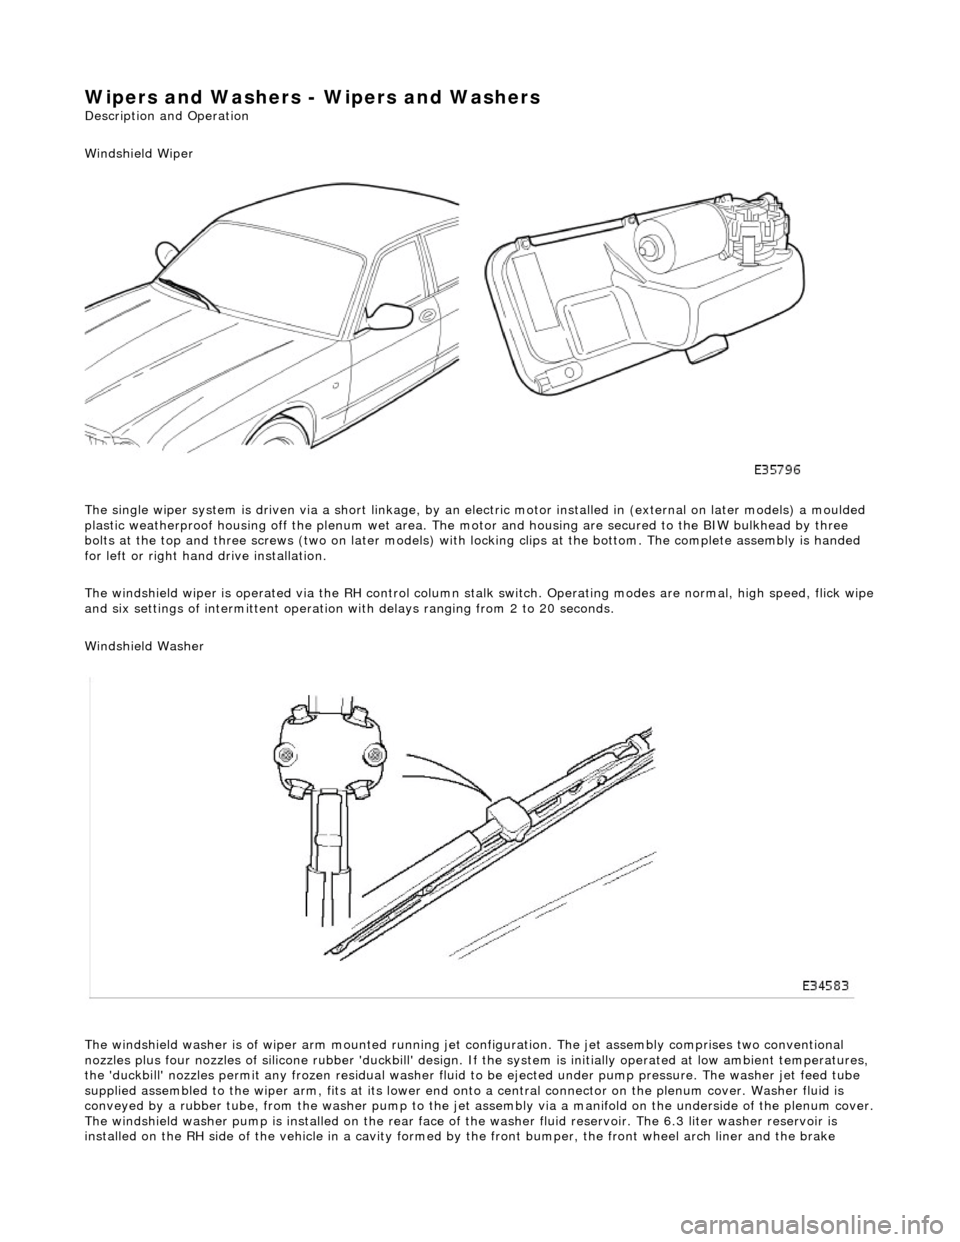 JAGUAR X308 1998 2.G Workshop Manual Wipers and Washers - Wipers and Washers 
Description and Operation 
Windshield Wiper  
The single wiper system is driven via a sh ort linkage, by an electric motor installed in (external on later mode